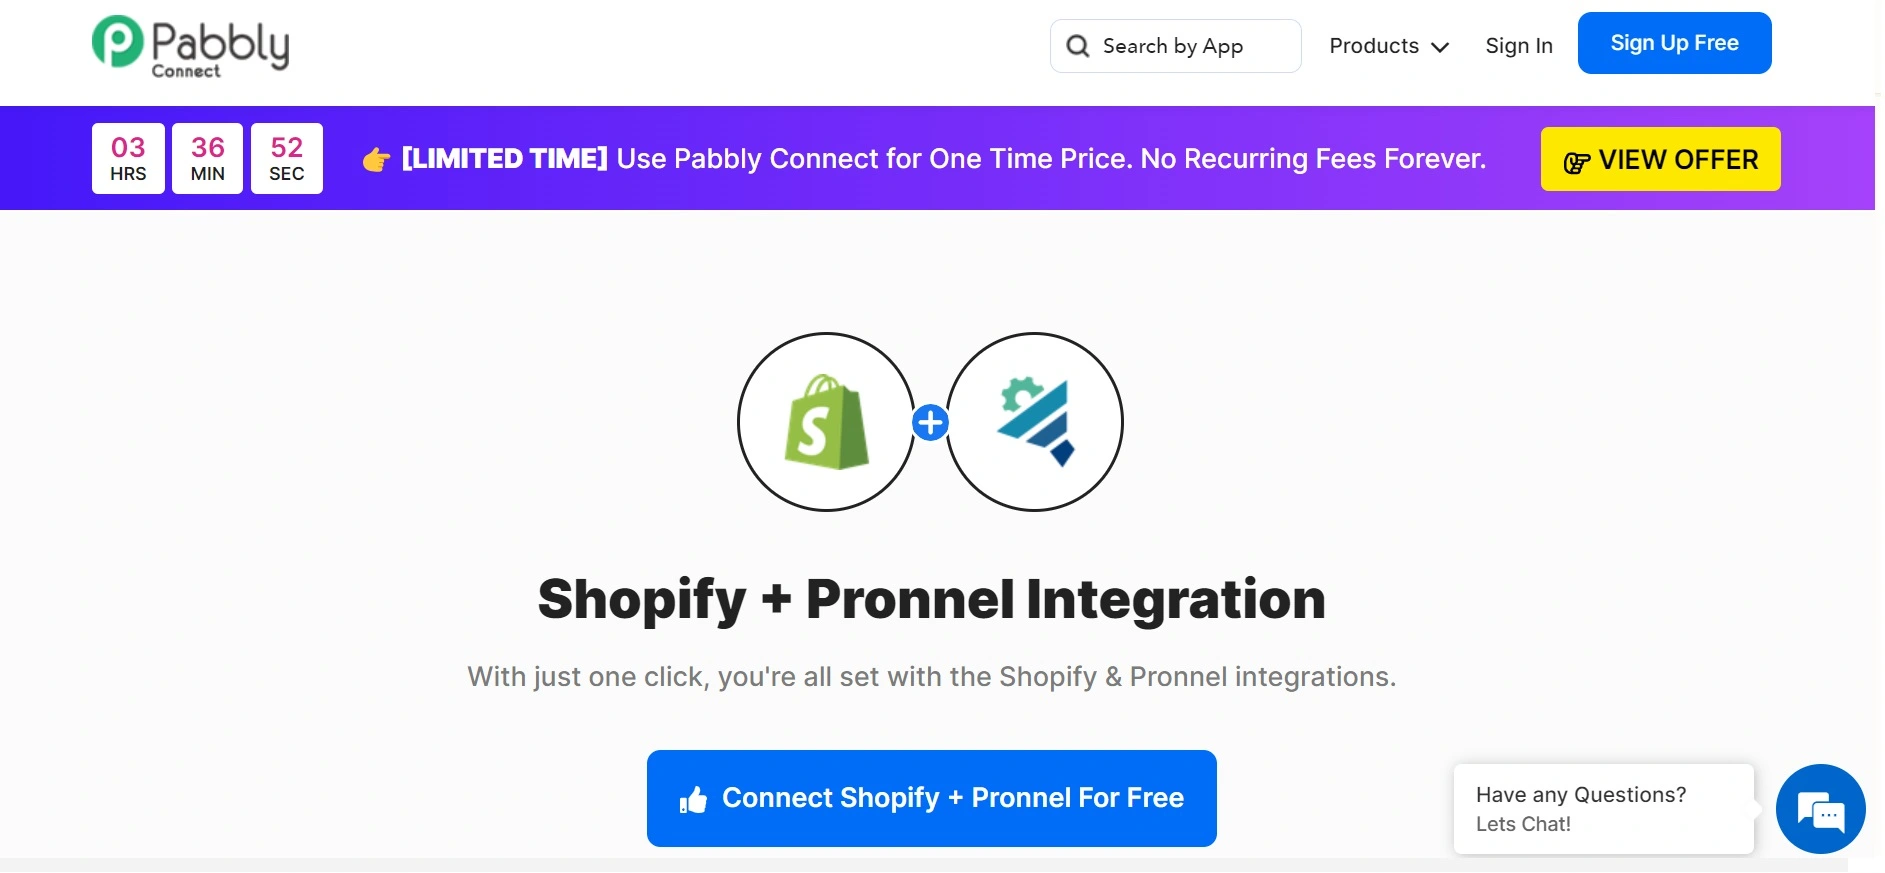 Single Click Integration of Your Shopify website's forms with Pronnel CRM through Pabbly.